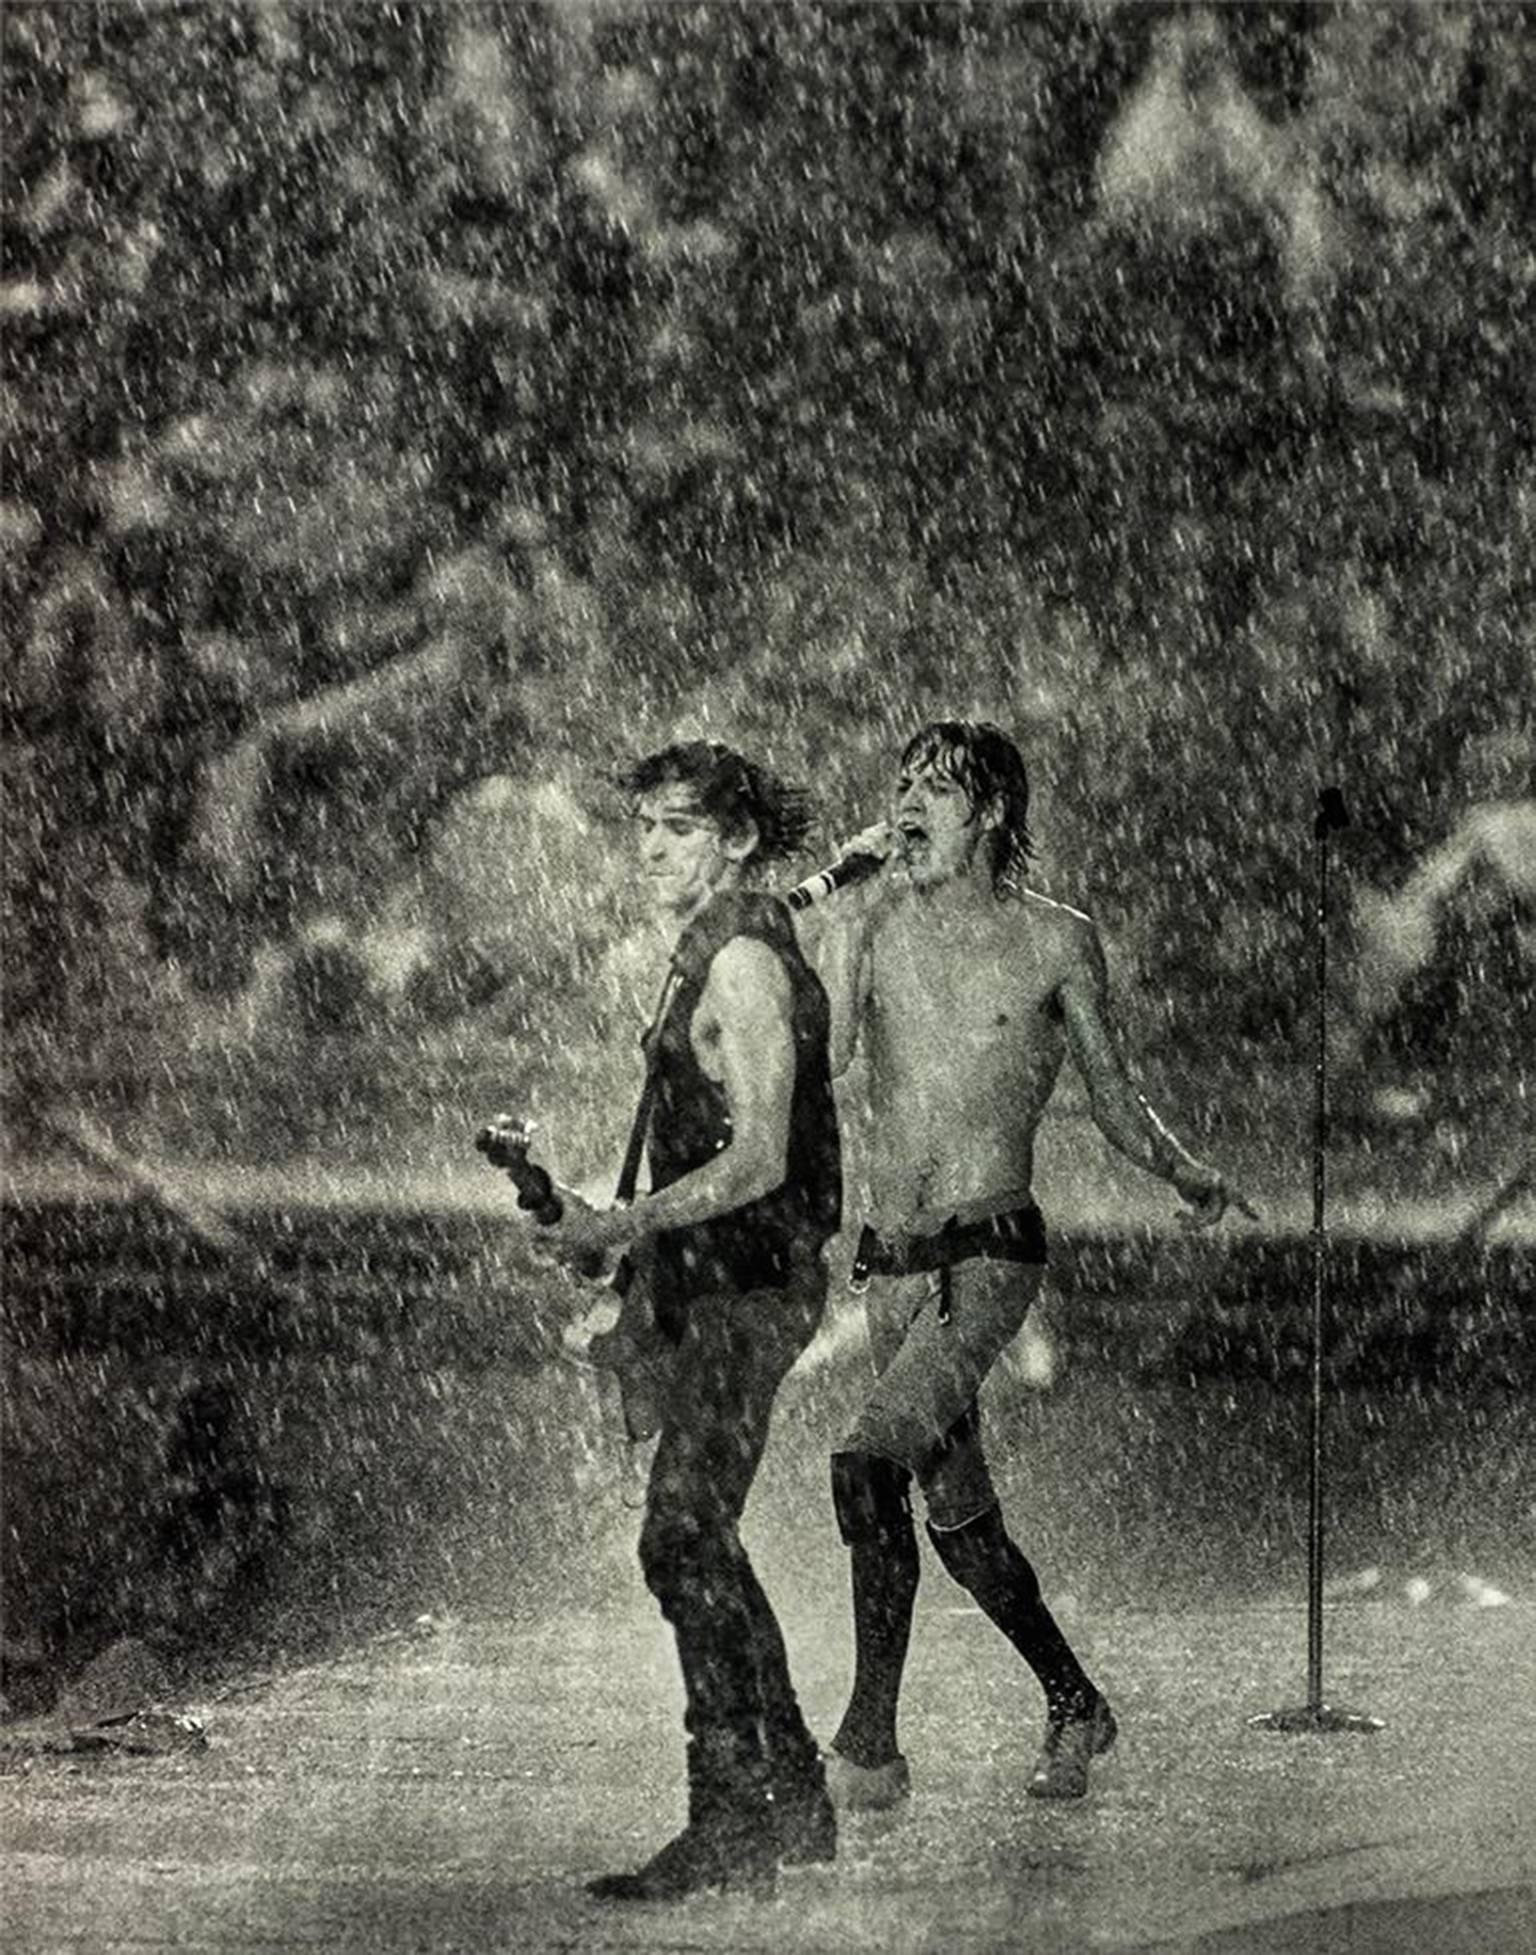 Jay Dickman Black and White Photograph - Mick Jagger & Keith Richards in Dallas Rainstorm Performing, 1981